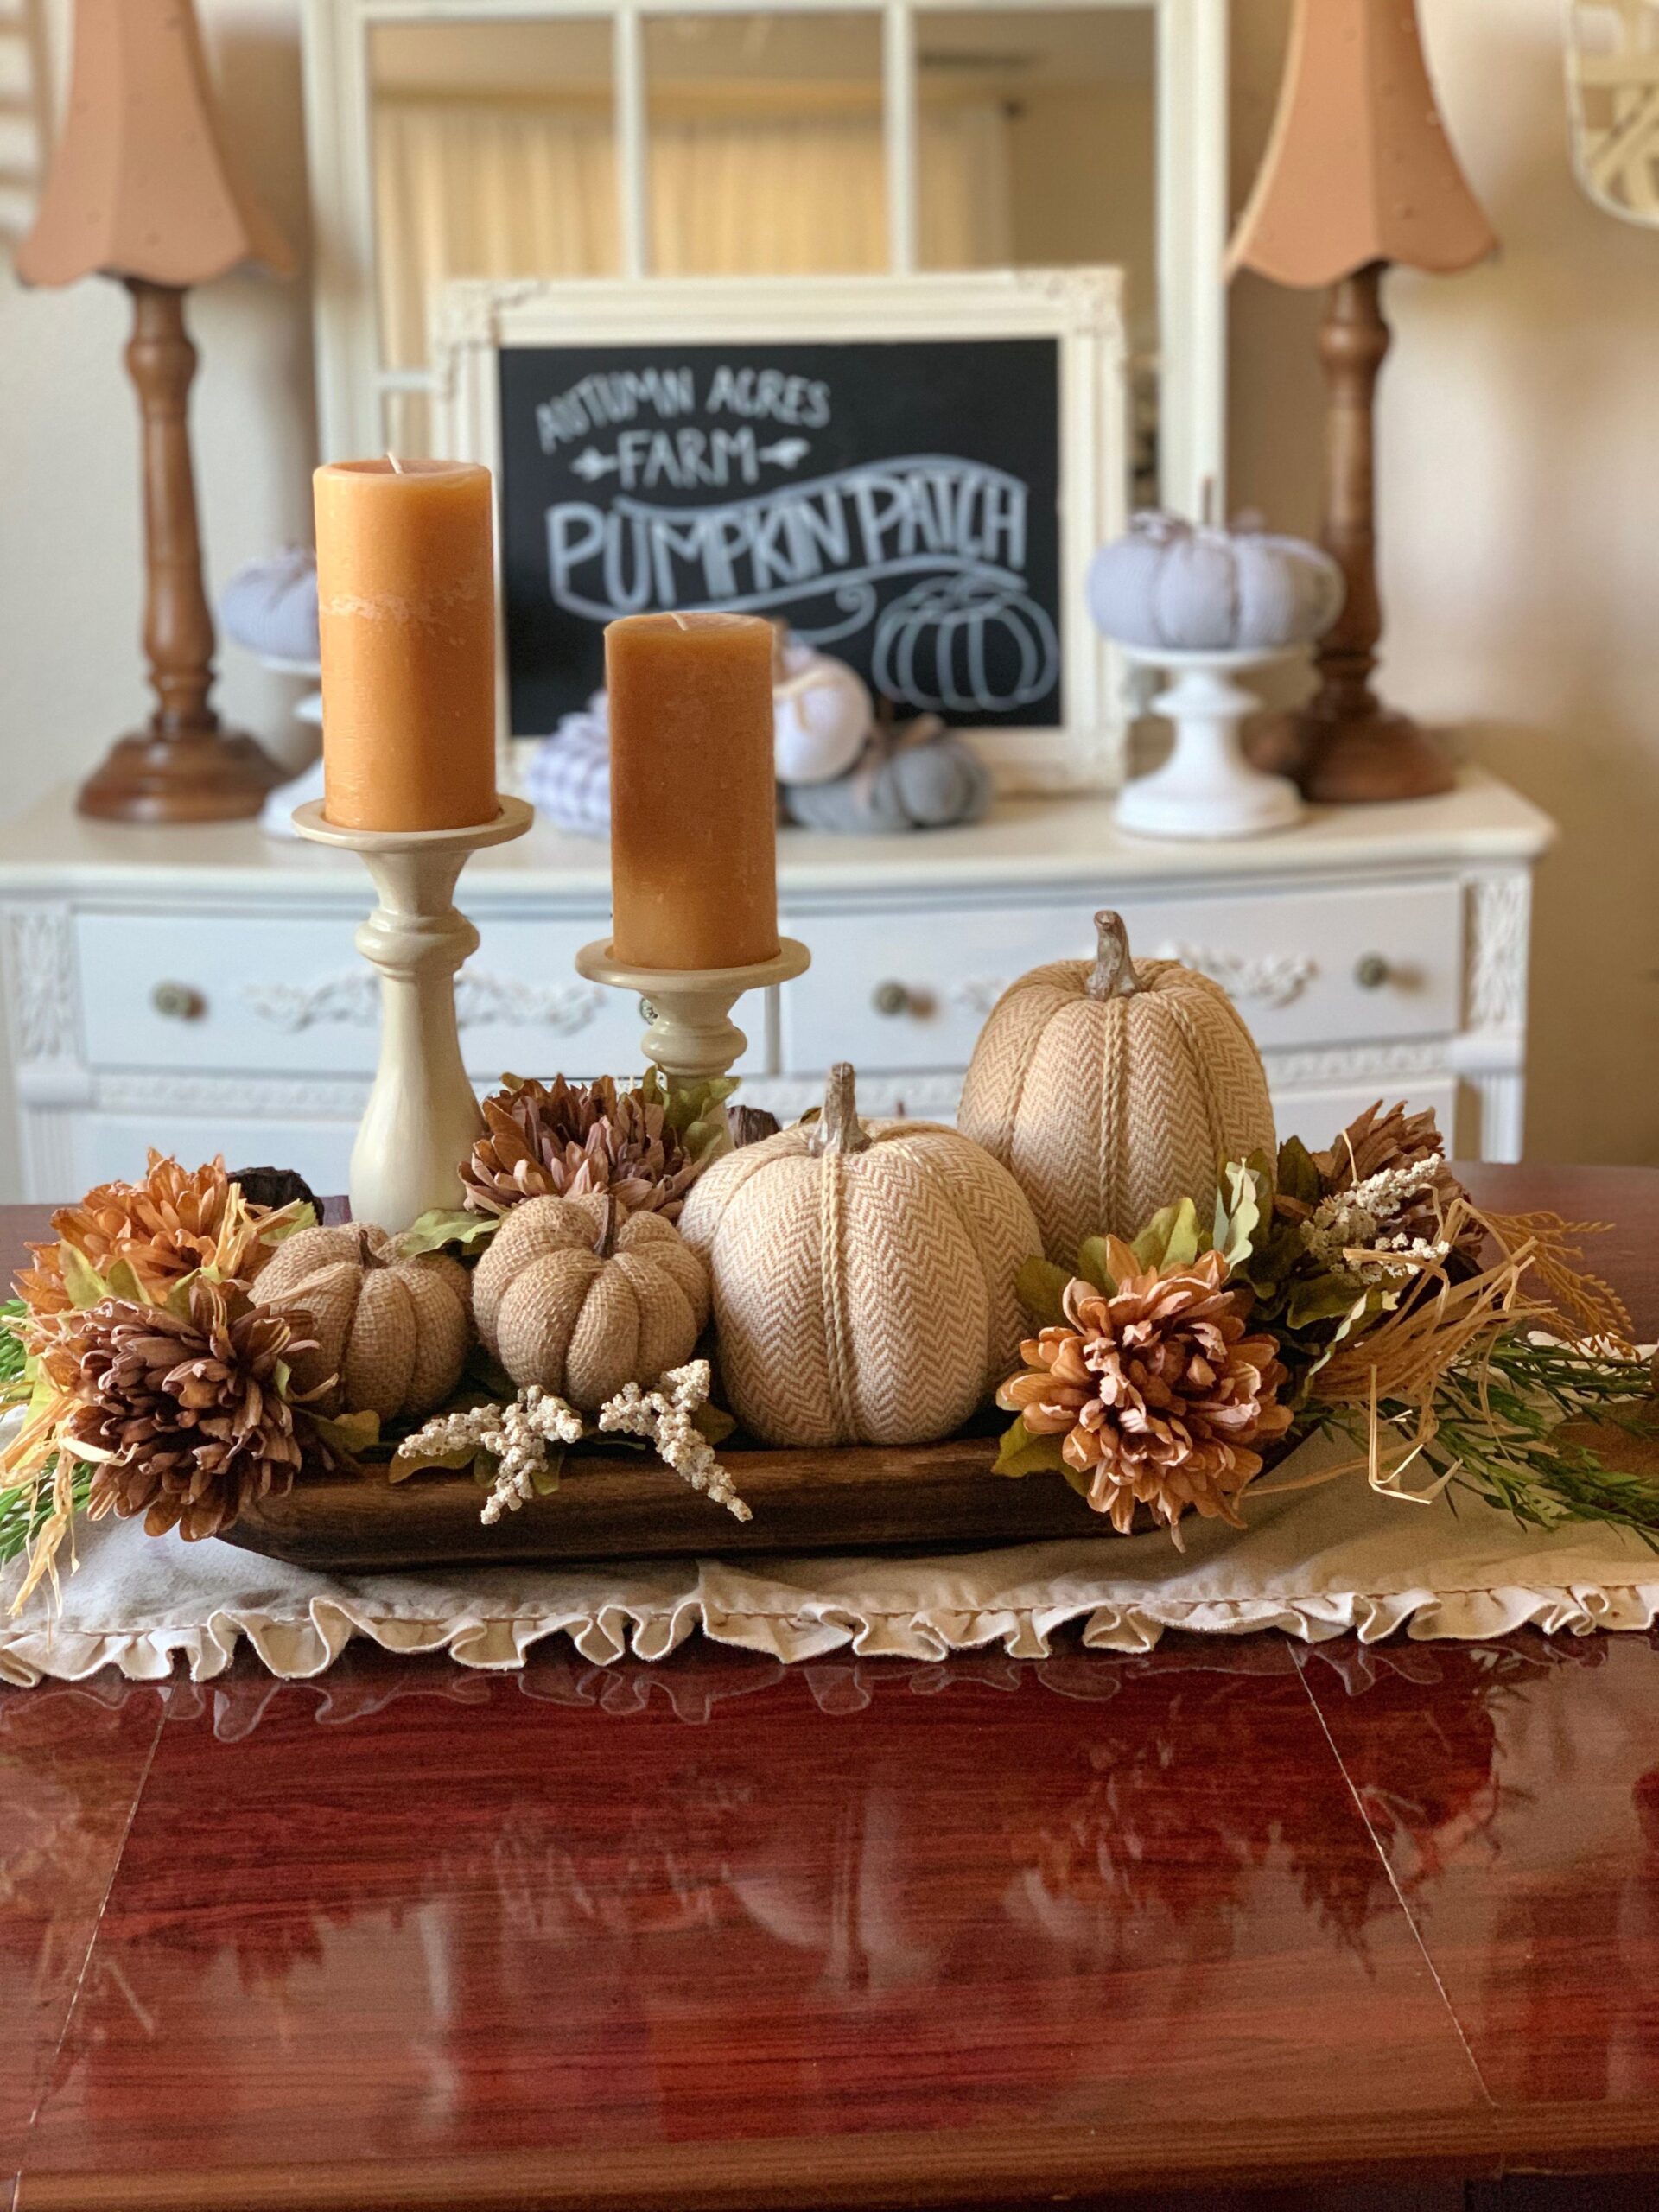 Creative Ways to Spruce Up Your Porch for Fall